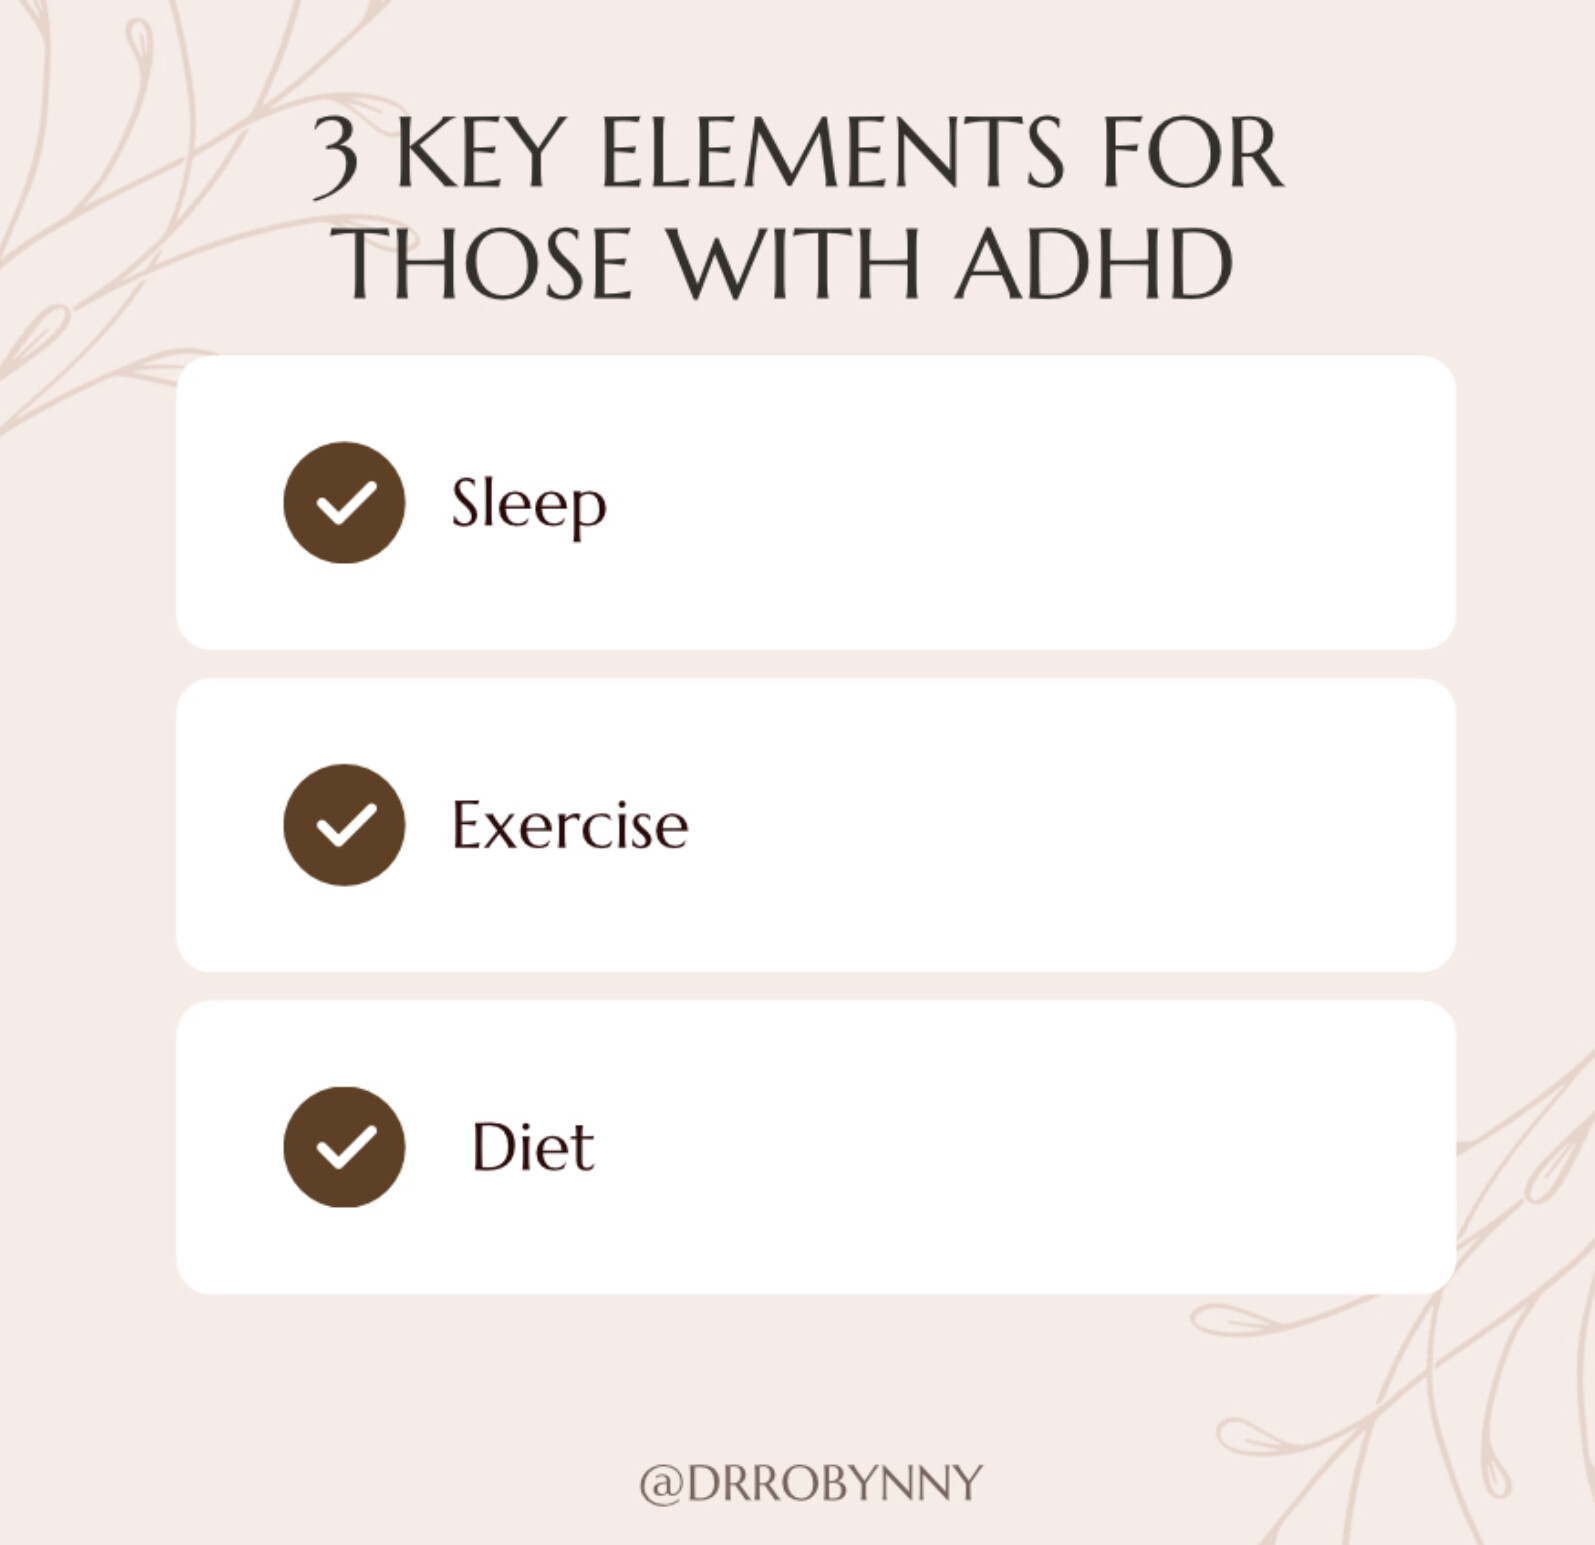 3 Key Elements for Those with ADHD